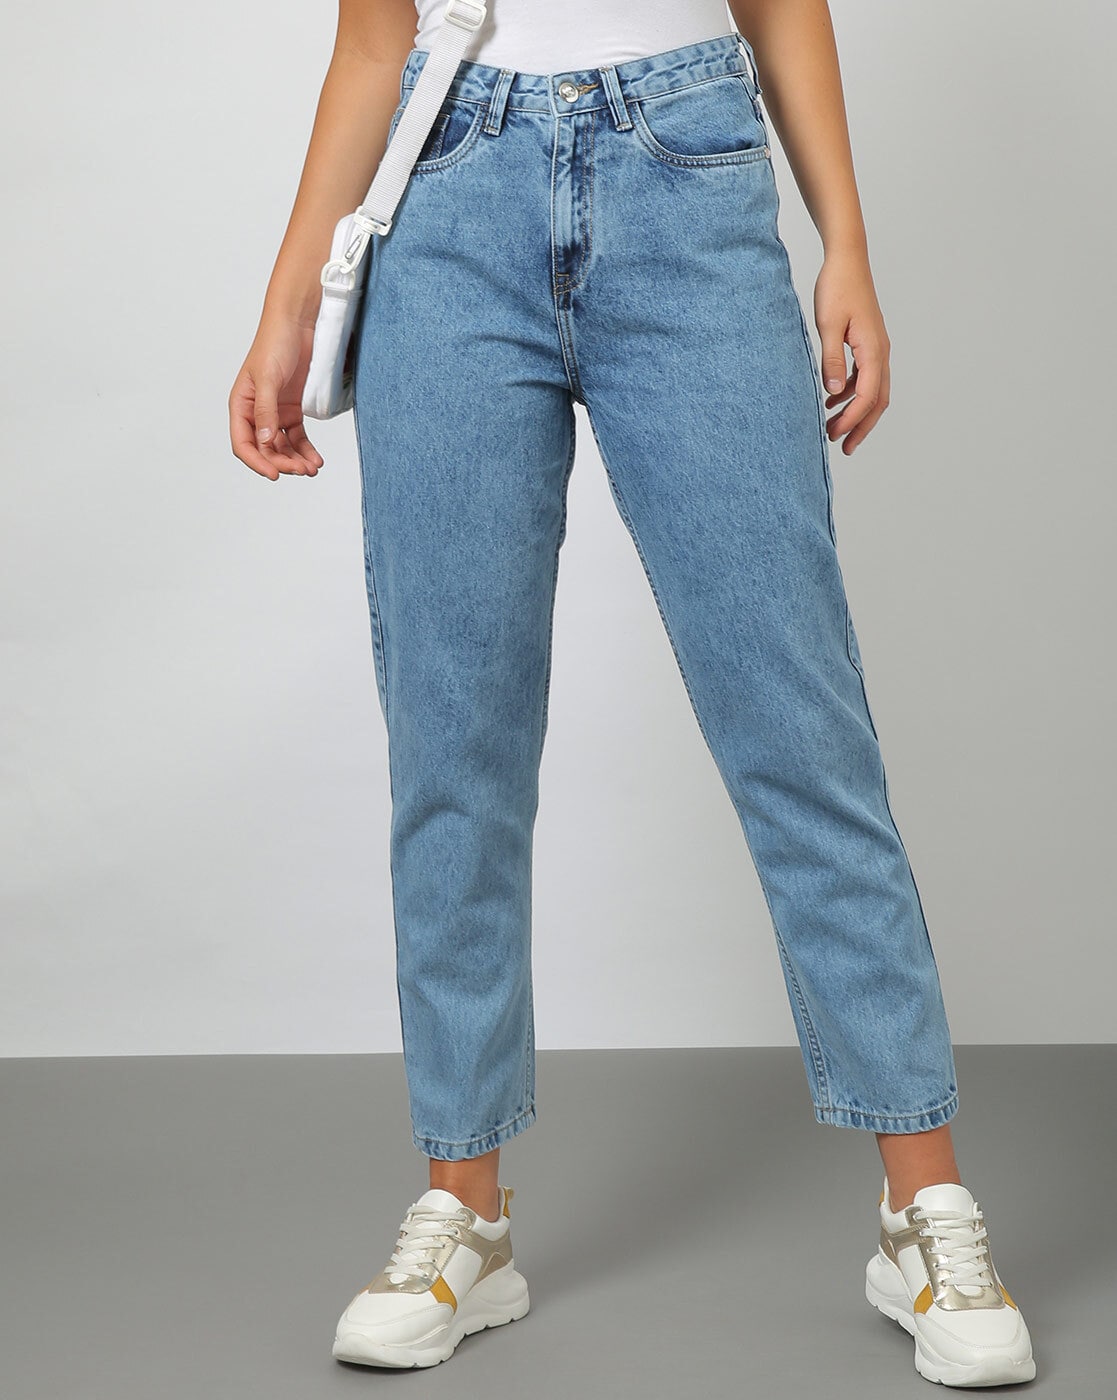 Buy Light Blue Jeans & Jeggings for Women by Outryt Online